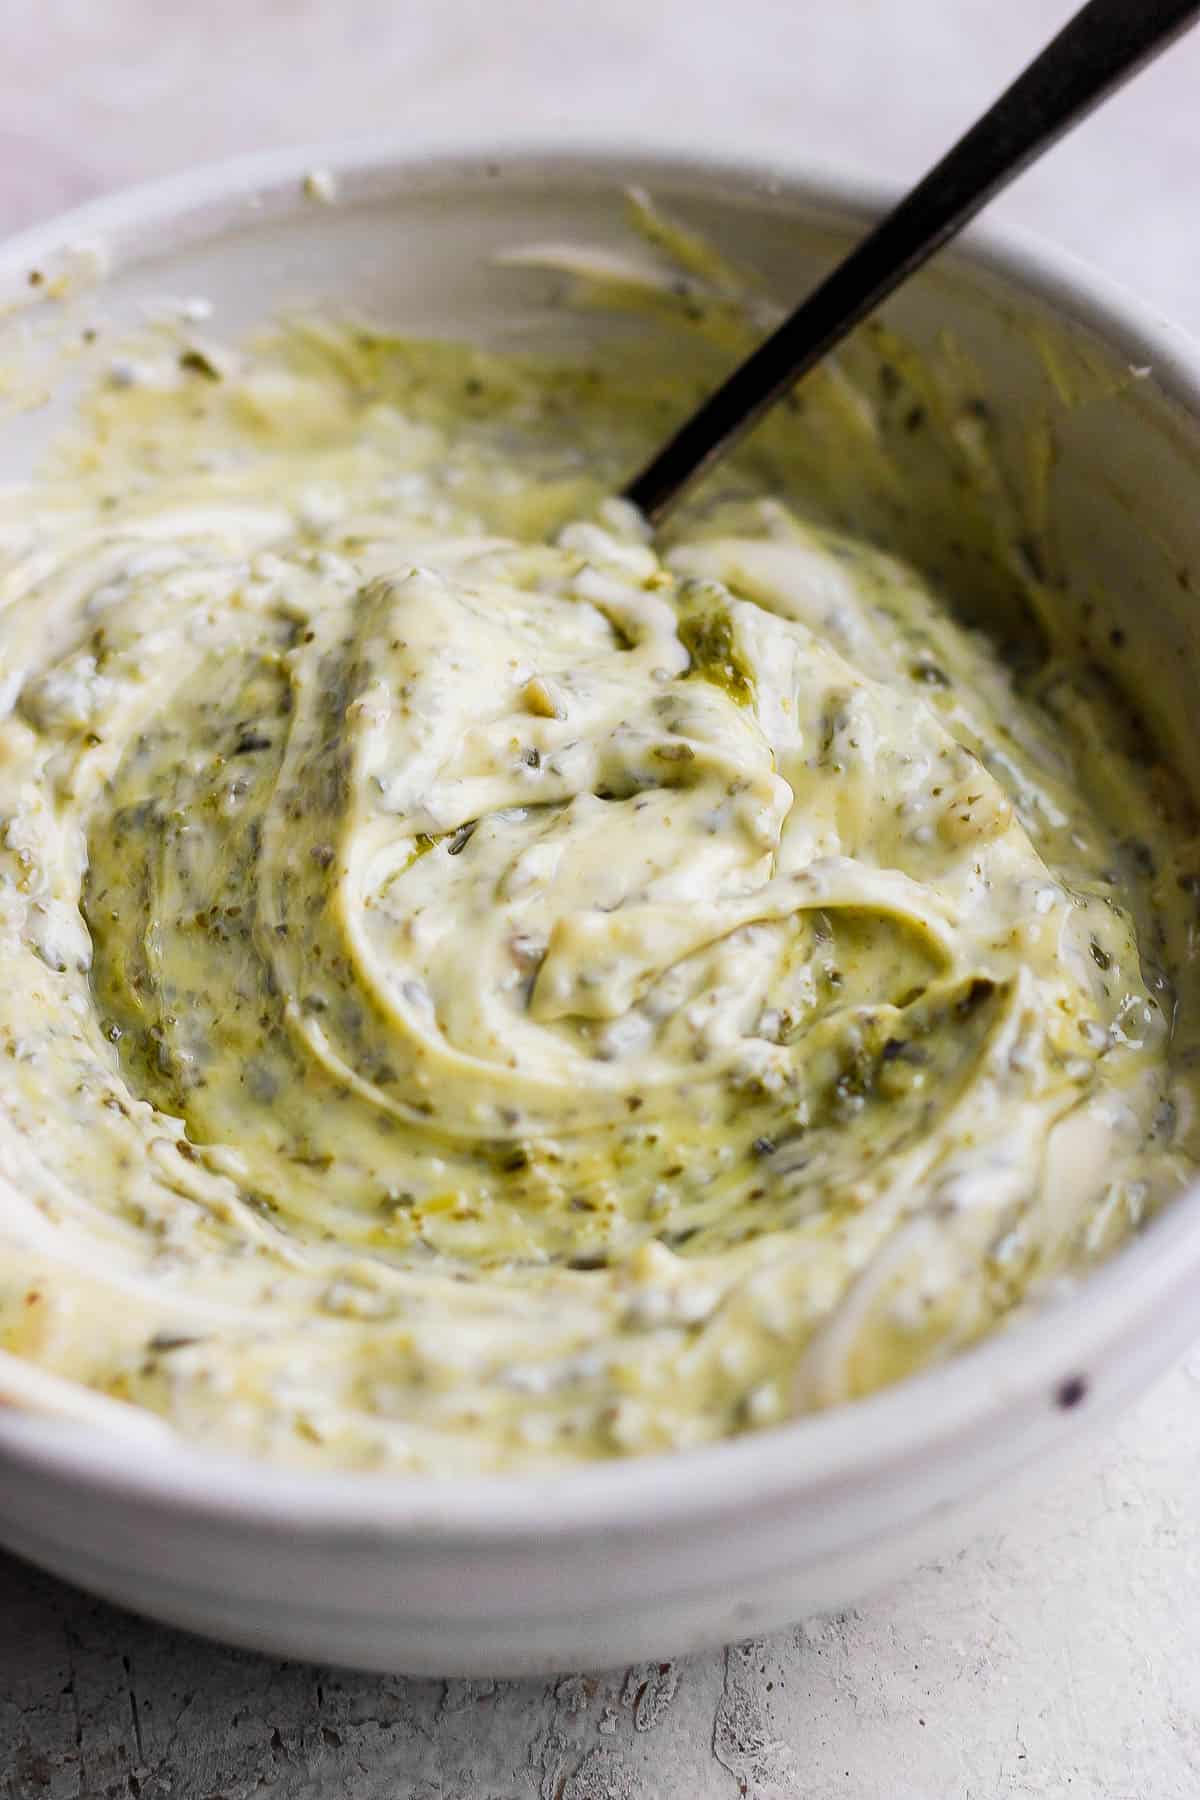 Pesto aioli all mixed together in a white bowl.